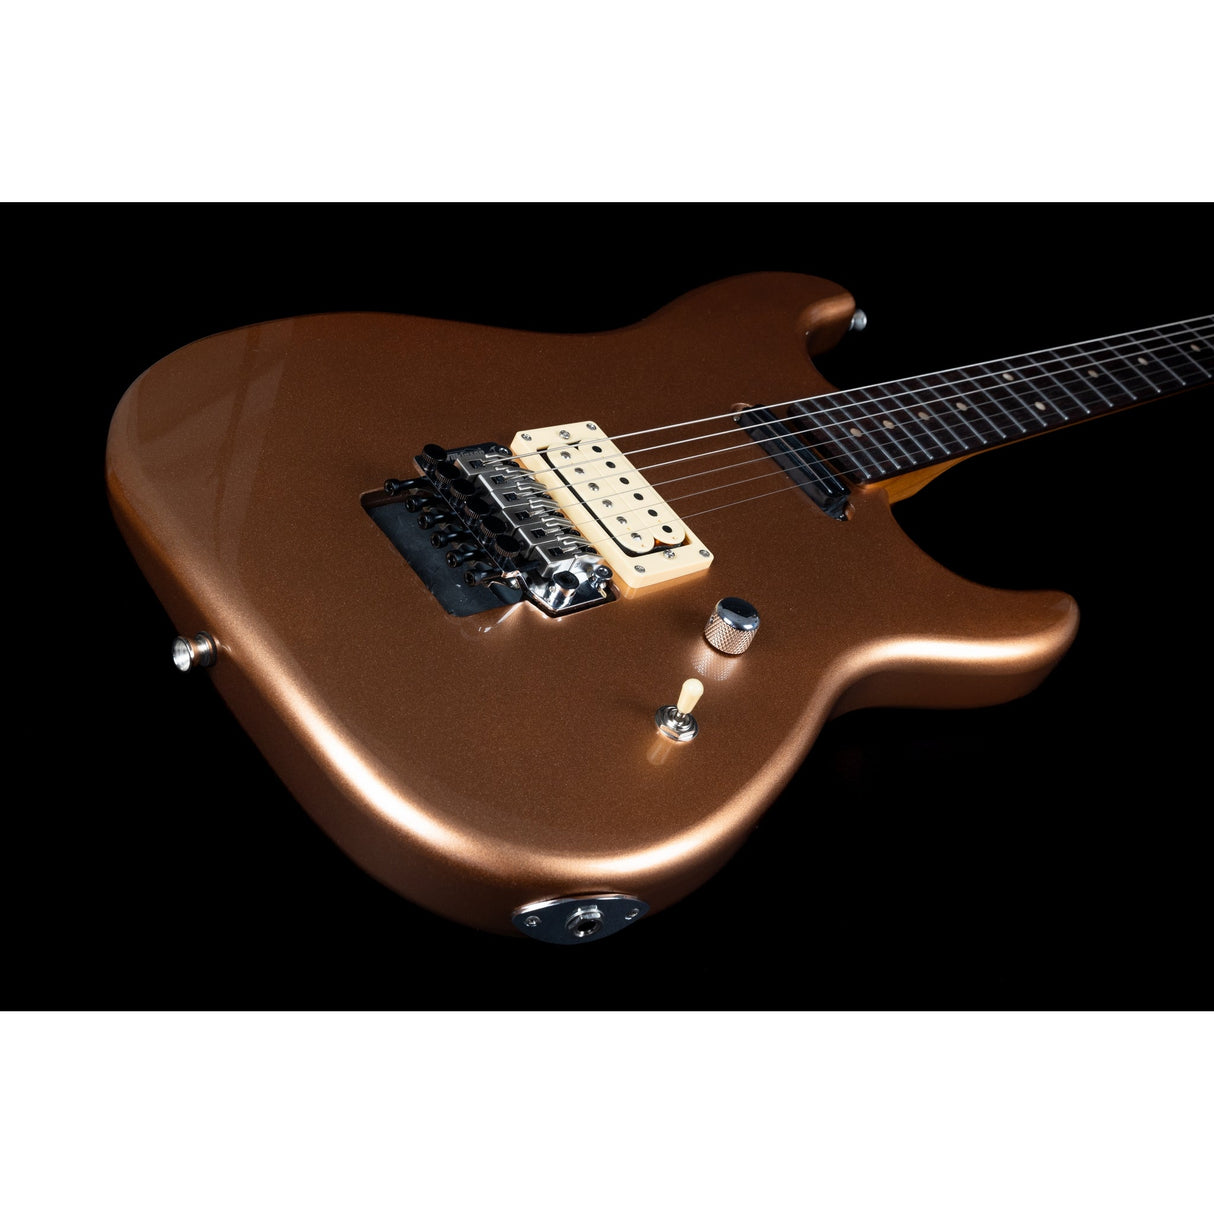 Jet Guitars JS-700 Canadian Maple Basswood Electric Guitar with HS Alnico V Pickup, Copper